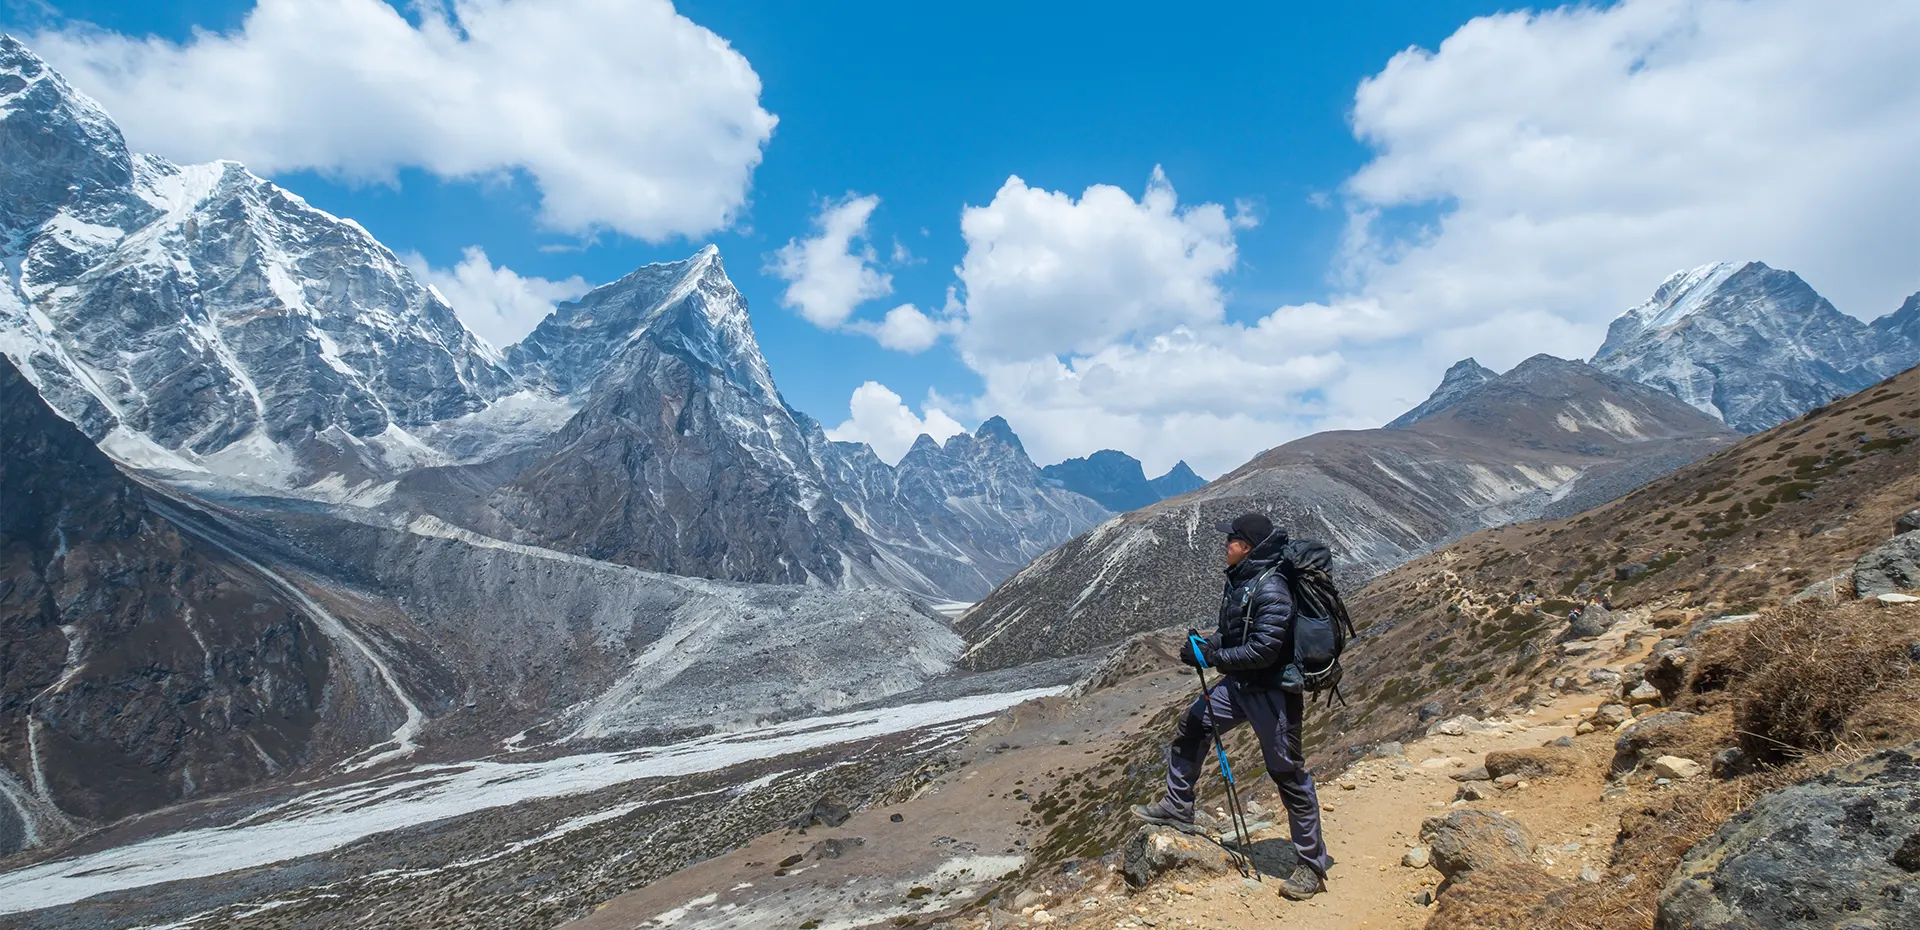 Background Image of Best Time to Trek in Nepal